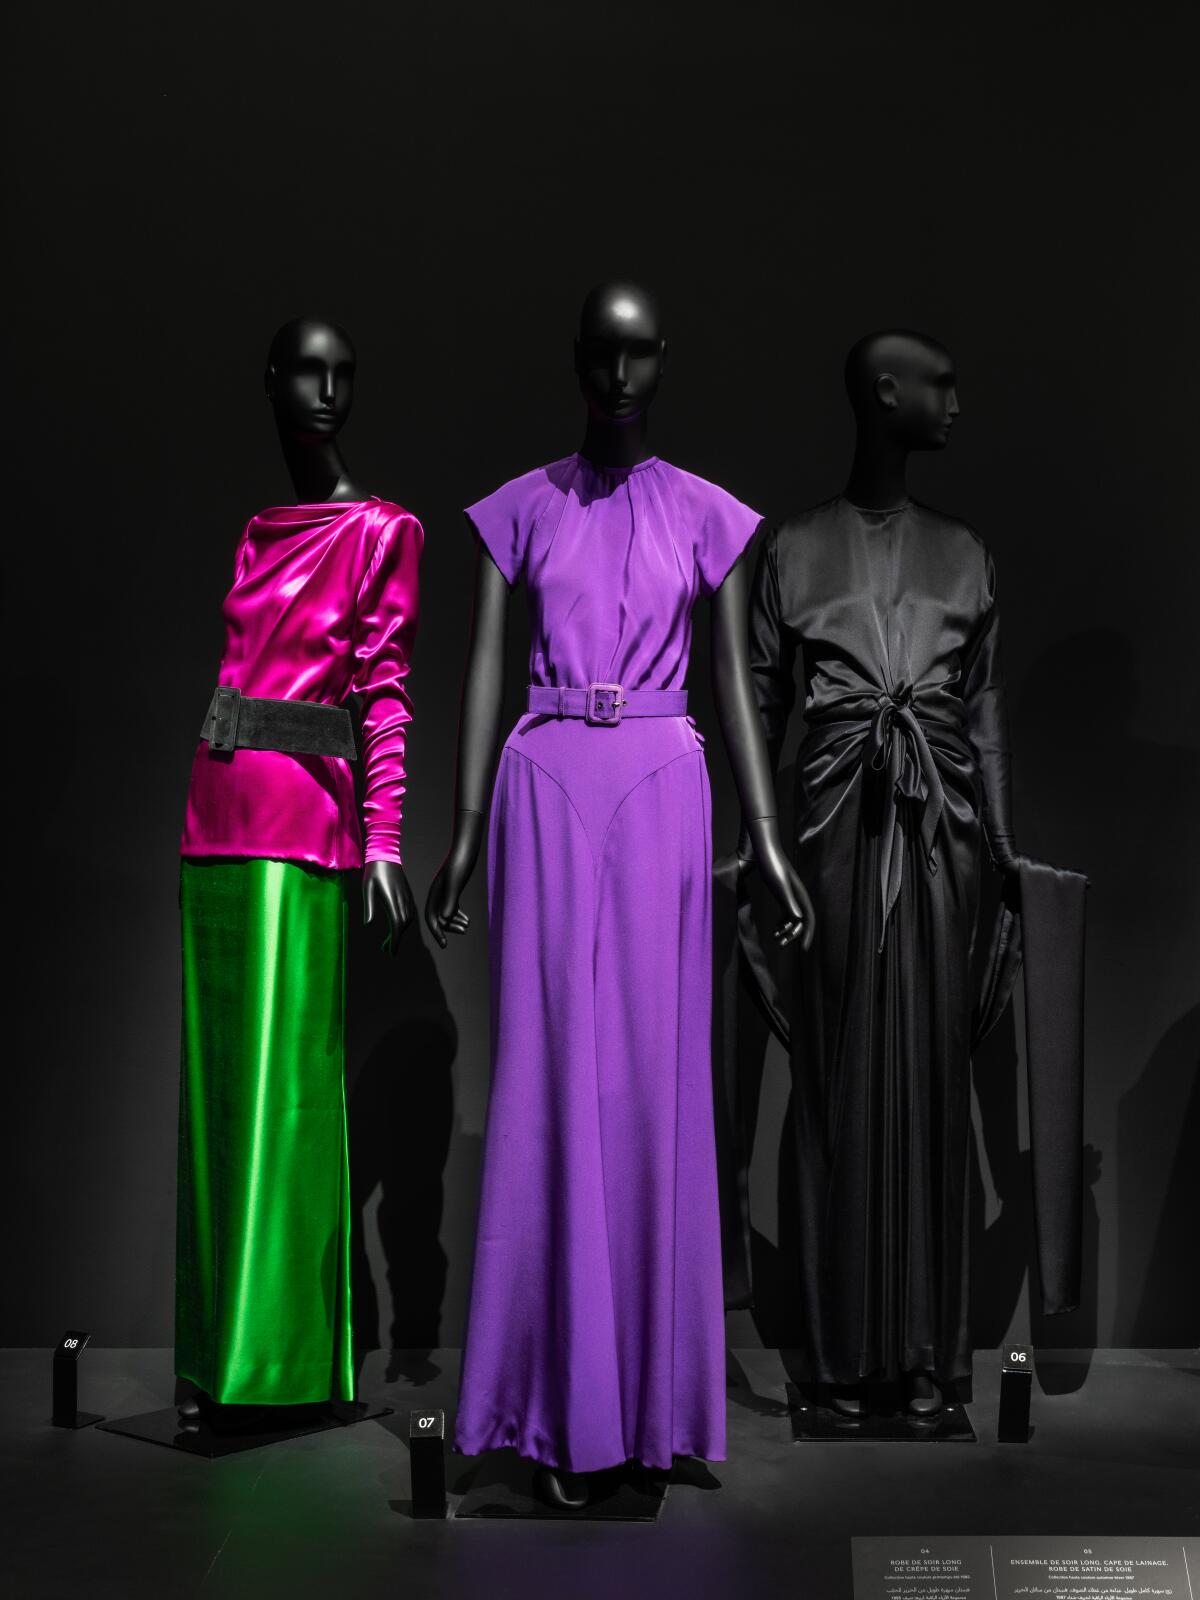 "Yves Saint Laurent: Line and Expression" at OCMA features haute couture garments from 1963 to 2001.